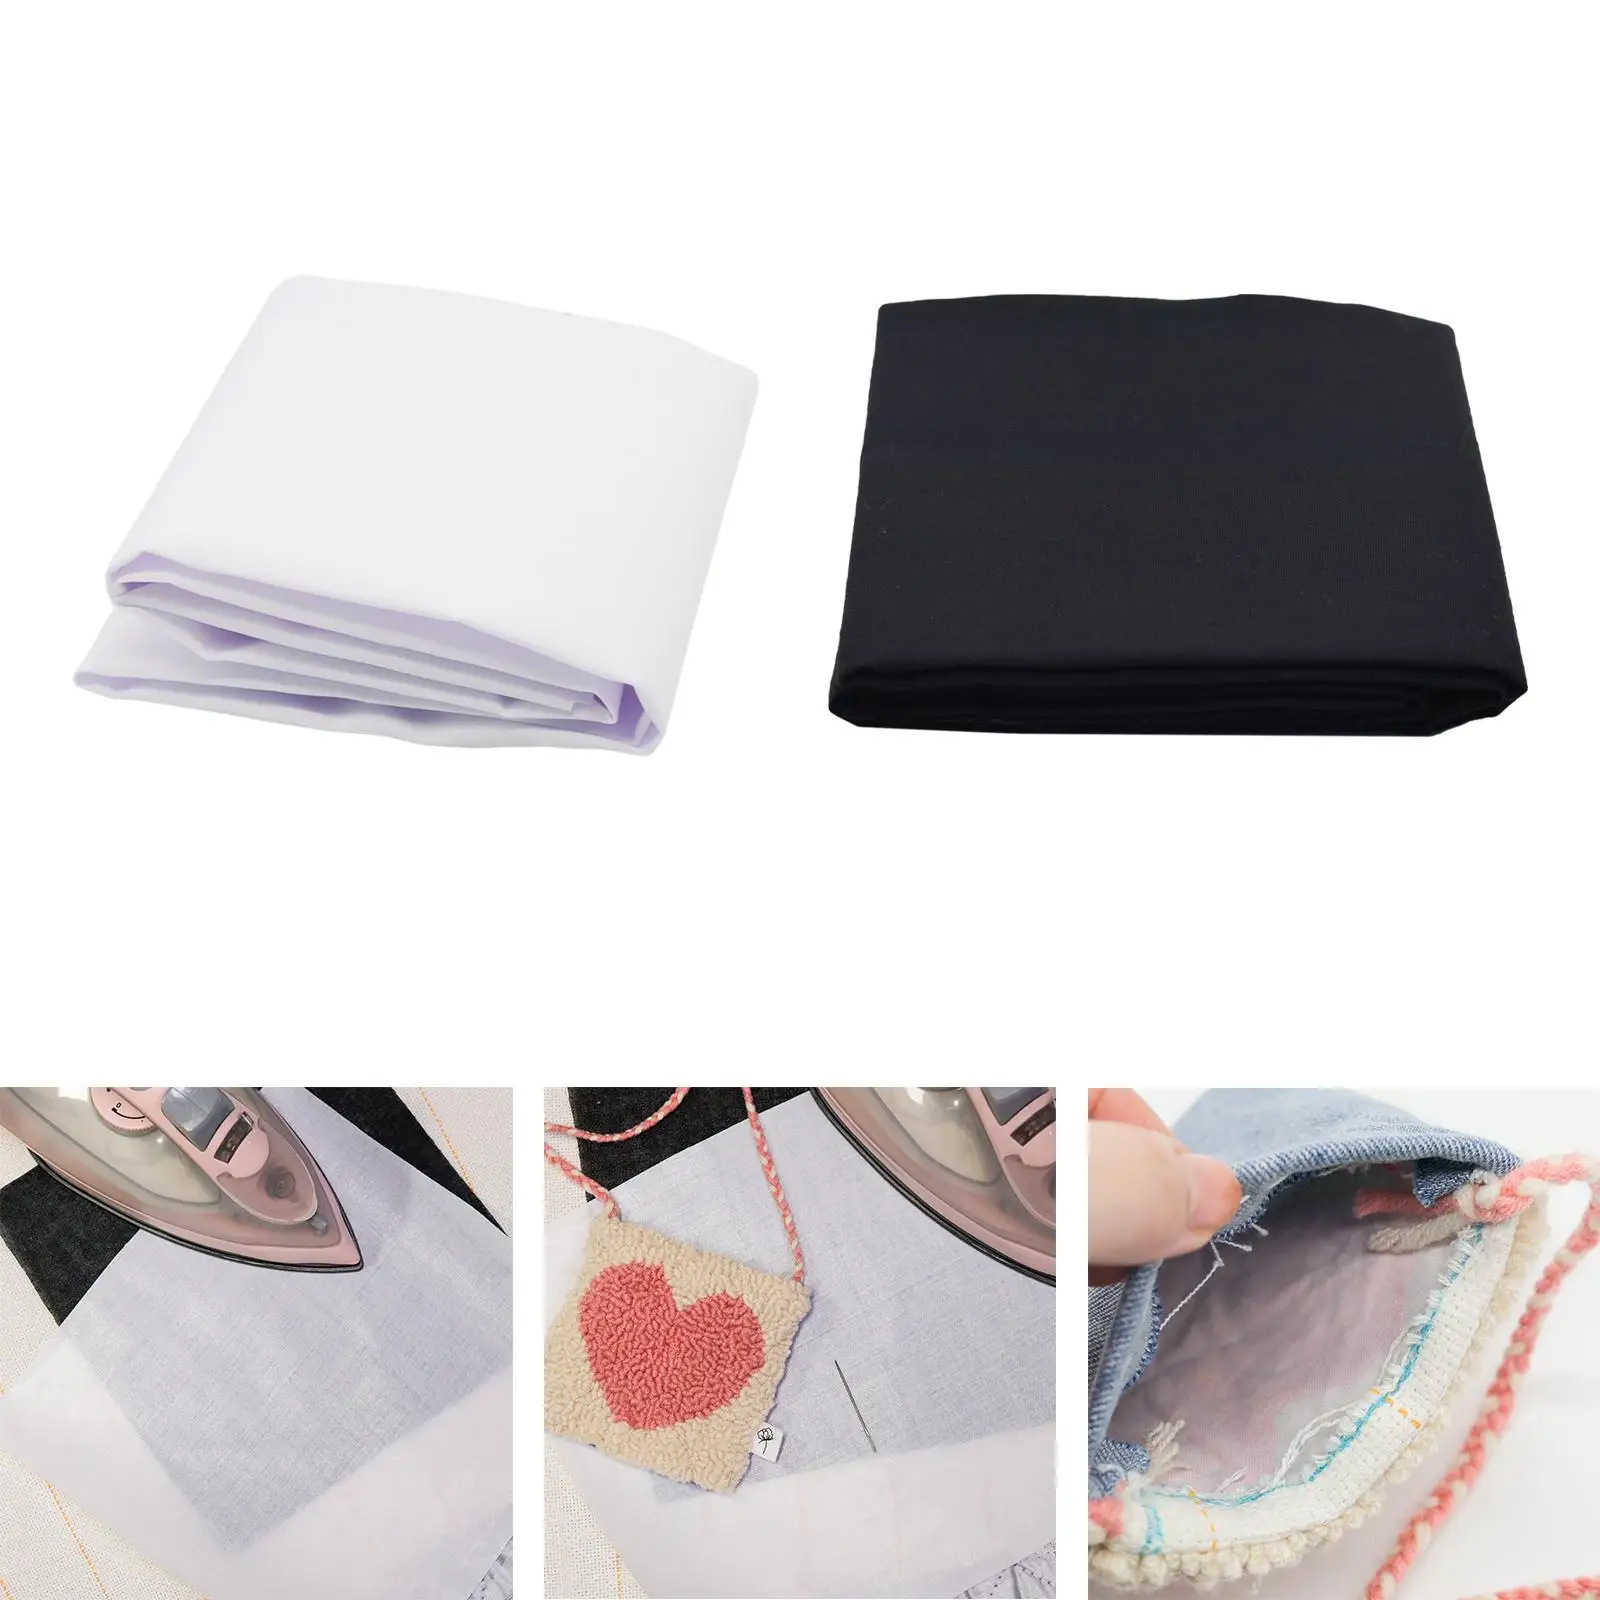 Ironing Fusible Premium Non Woven Interlining Adhesive Fabric for DIY Tufting Art Crafts